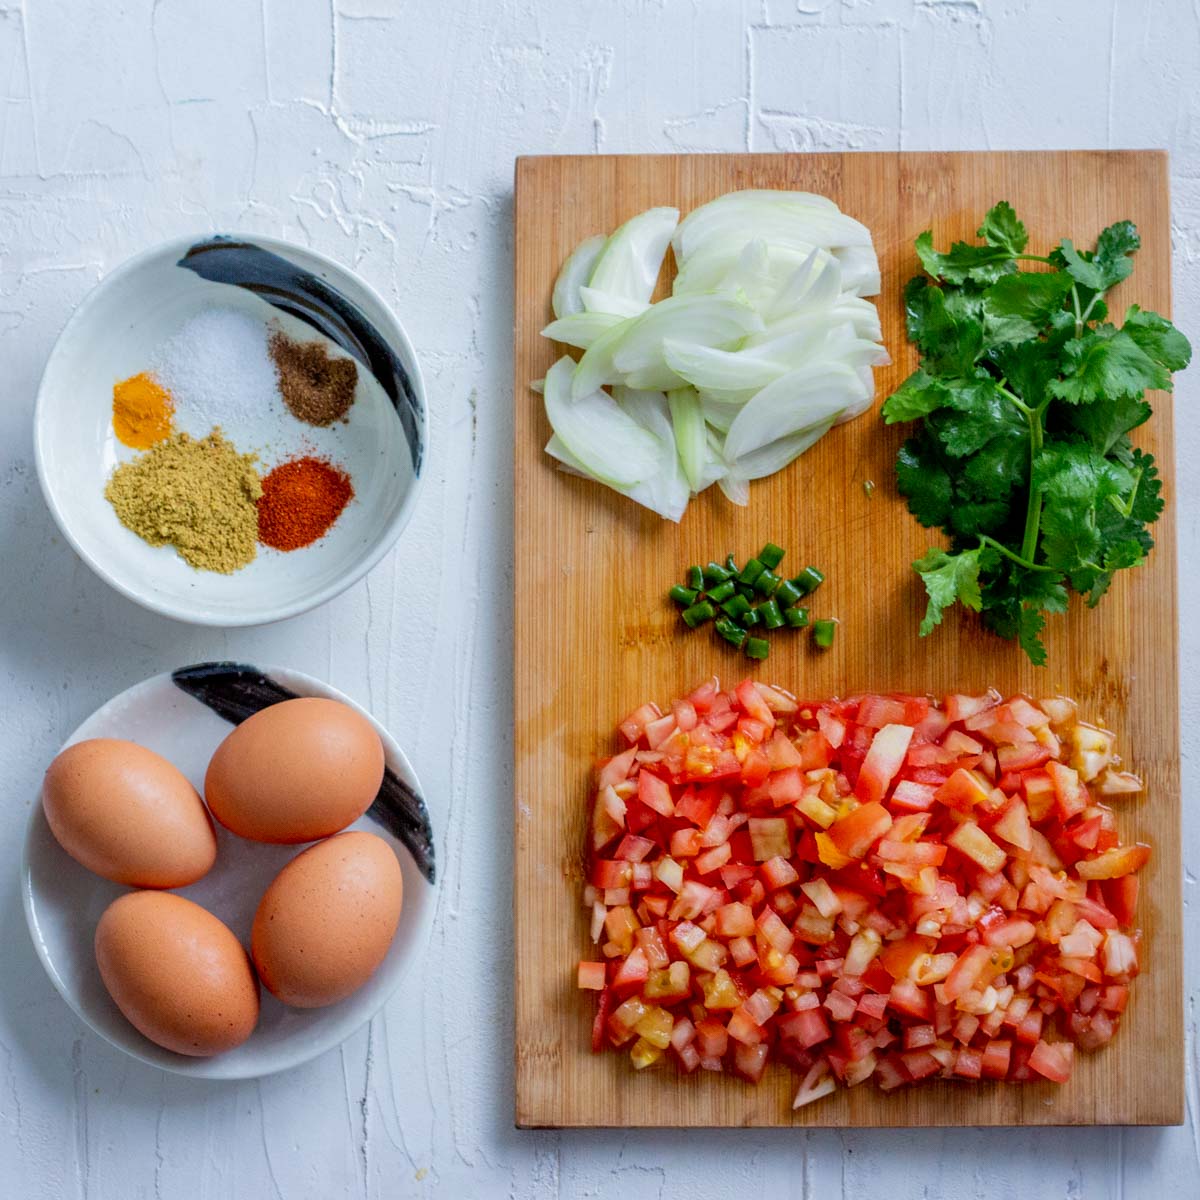 On the bottom left is a small plate with 4 eggs. Above the plate is a small bowl with coriander powder, red chili powder, salt, turmeric powder and garam masala. On the right is a chopping board with chopped tomatoes, sliced onions, green chilies and coriander leaves kept on top of it. 